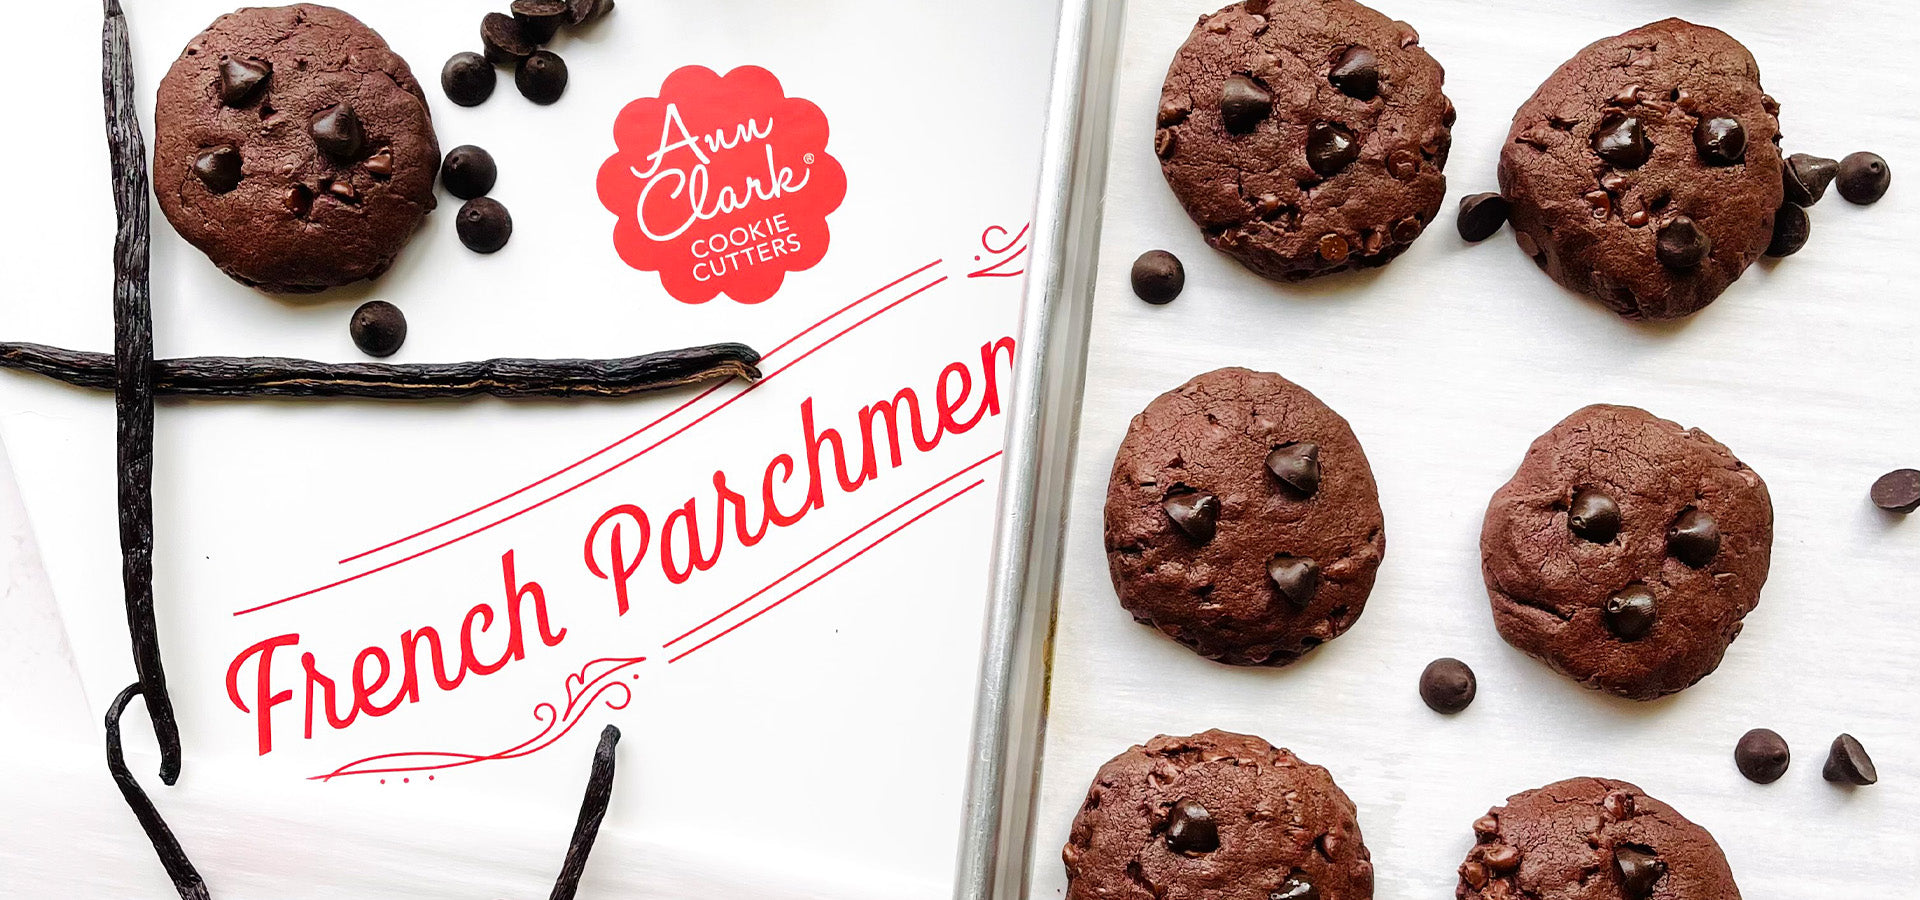 Ann Clark parchment paper and chocolate cookies with chocolate chips and vanilla beans